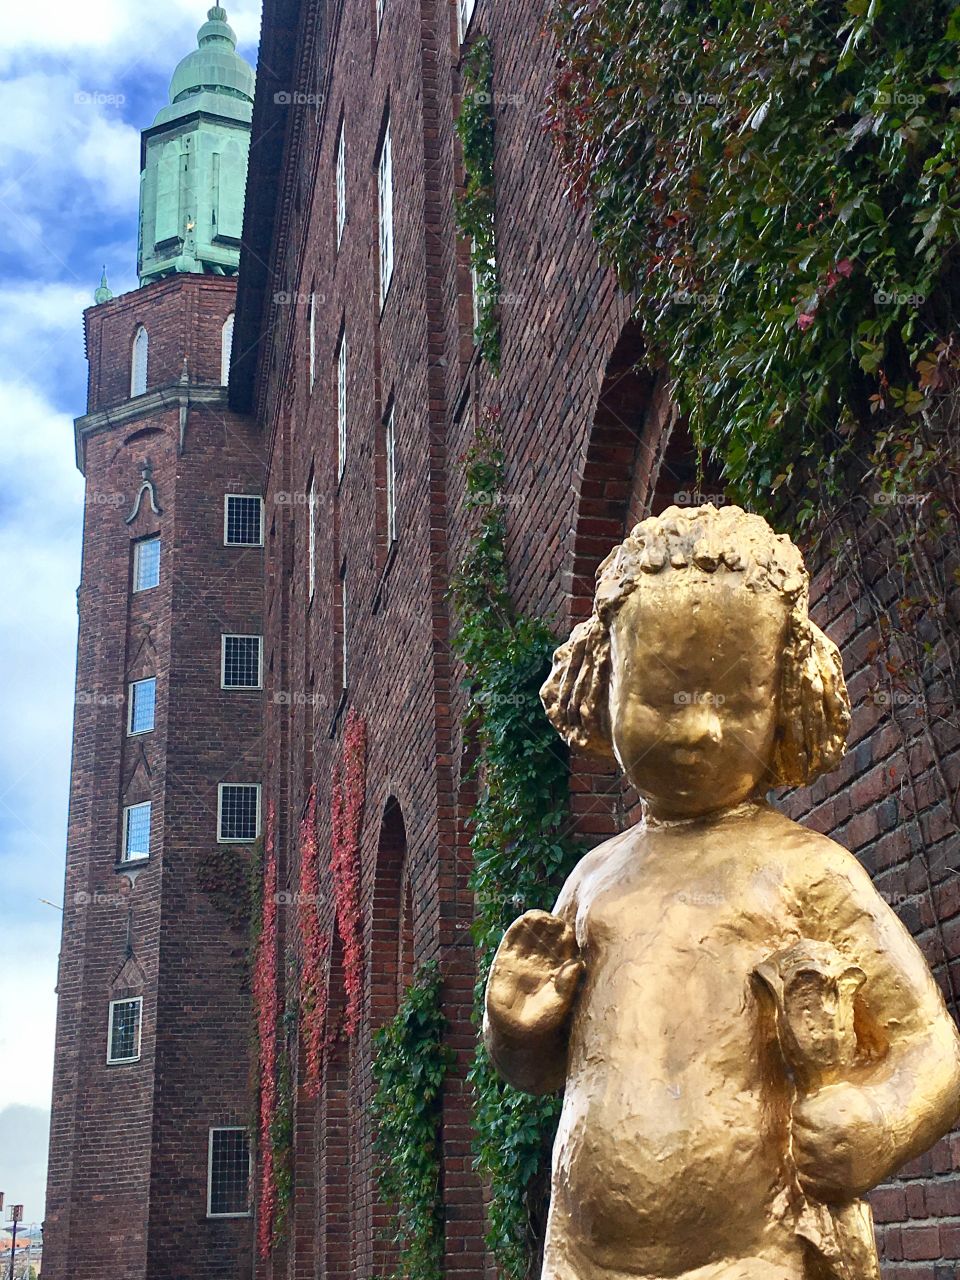 Looking up at an old brick building, with a gold statue of a child 